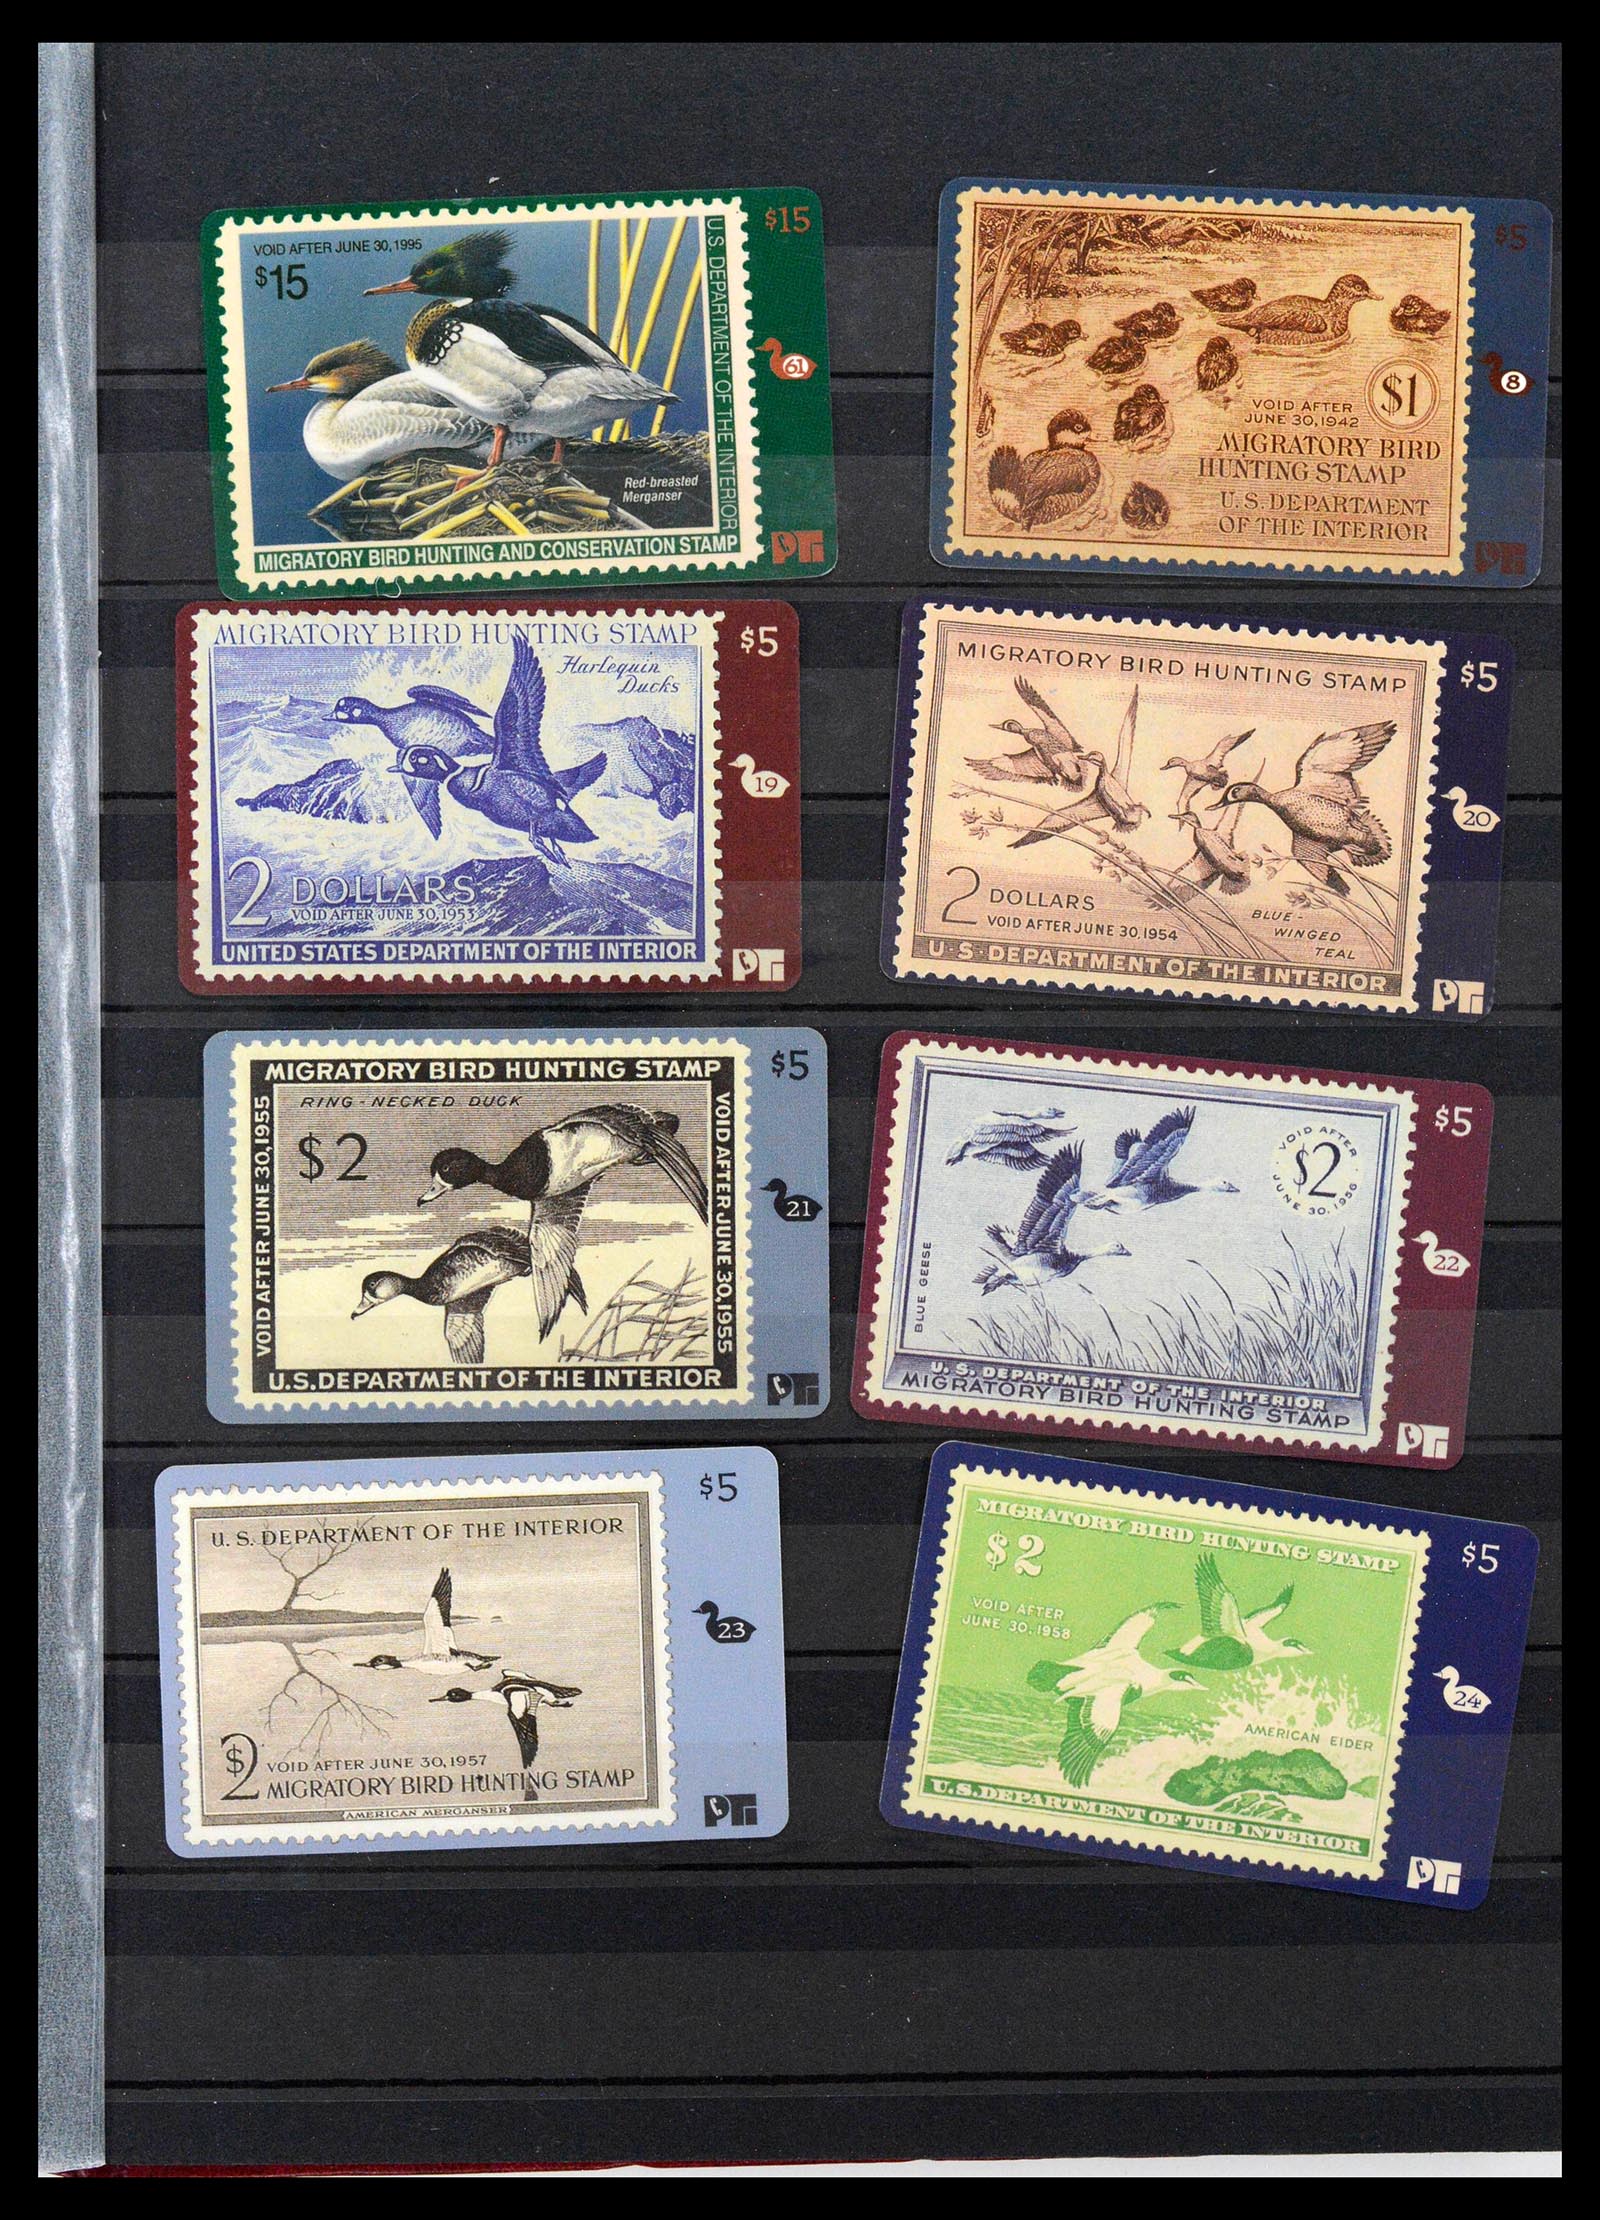 39426 0021 - Stamp collection 39426 USA duckstamps 1934-2007.